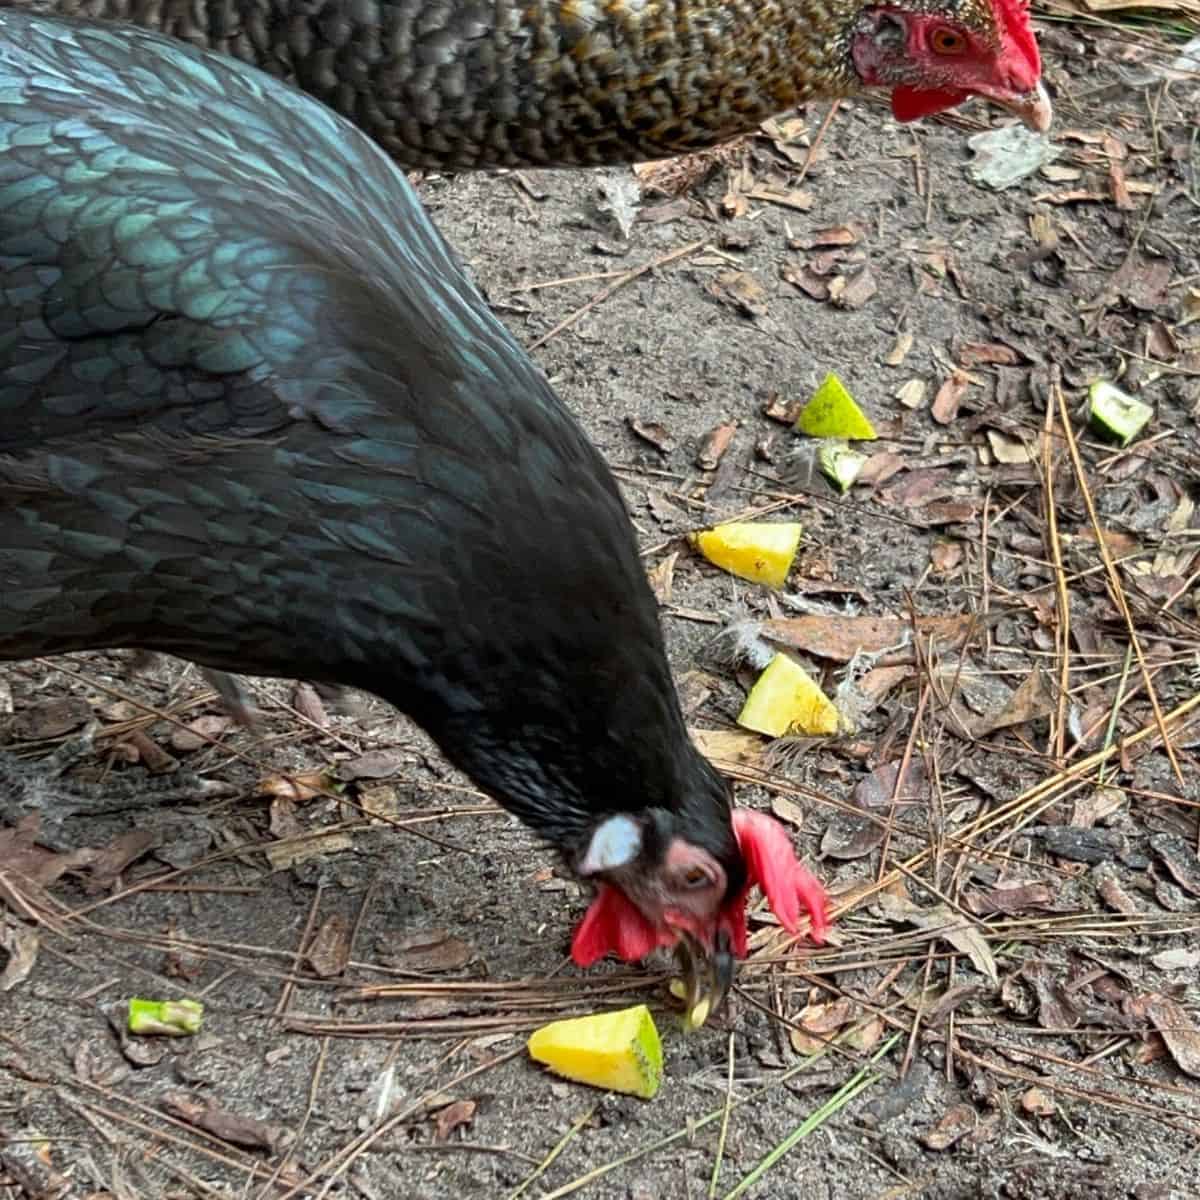 Chickens eating mango off the ground.